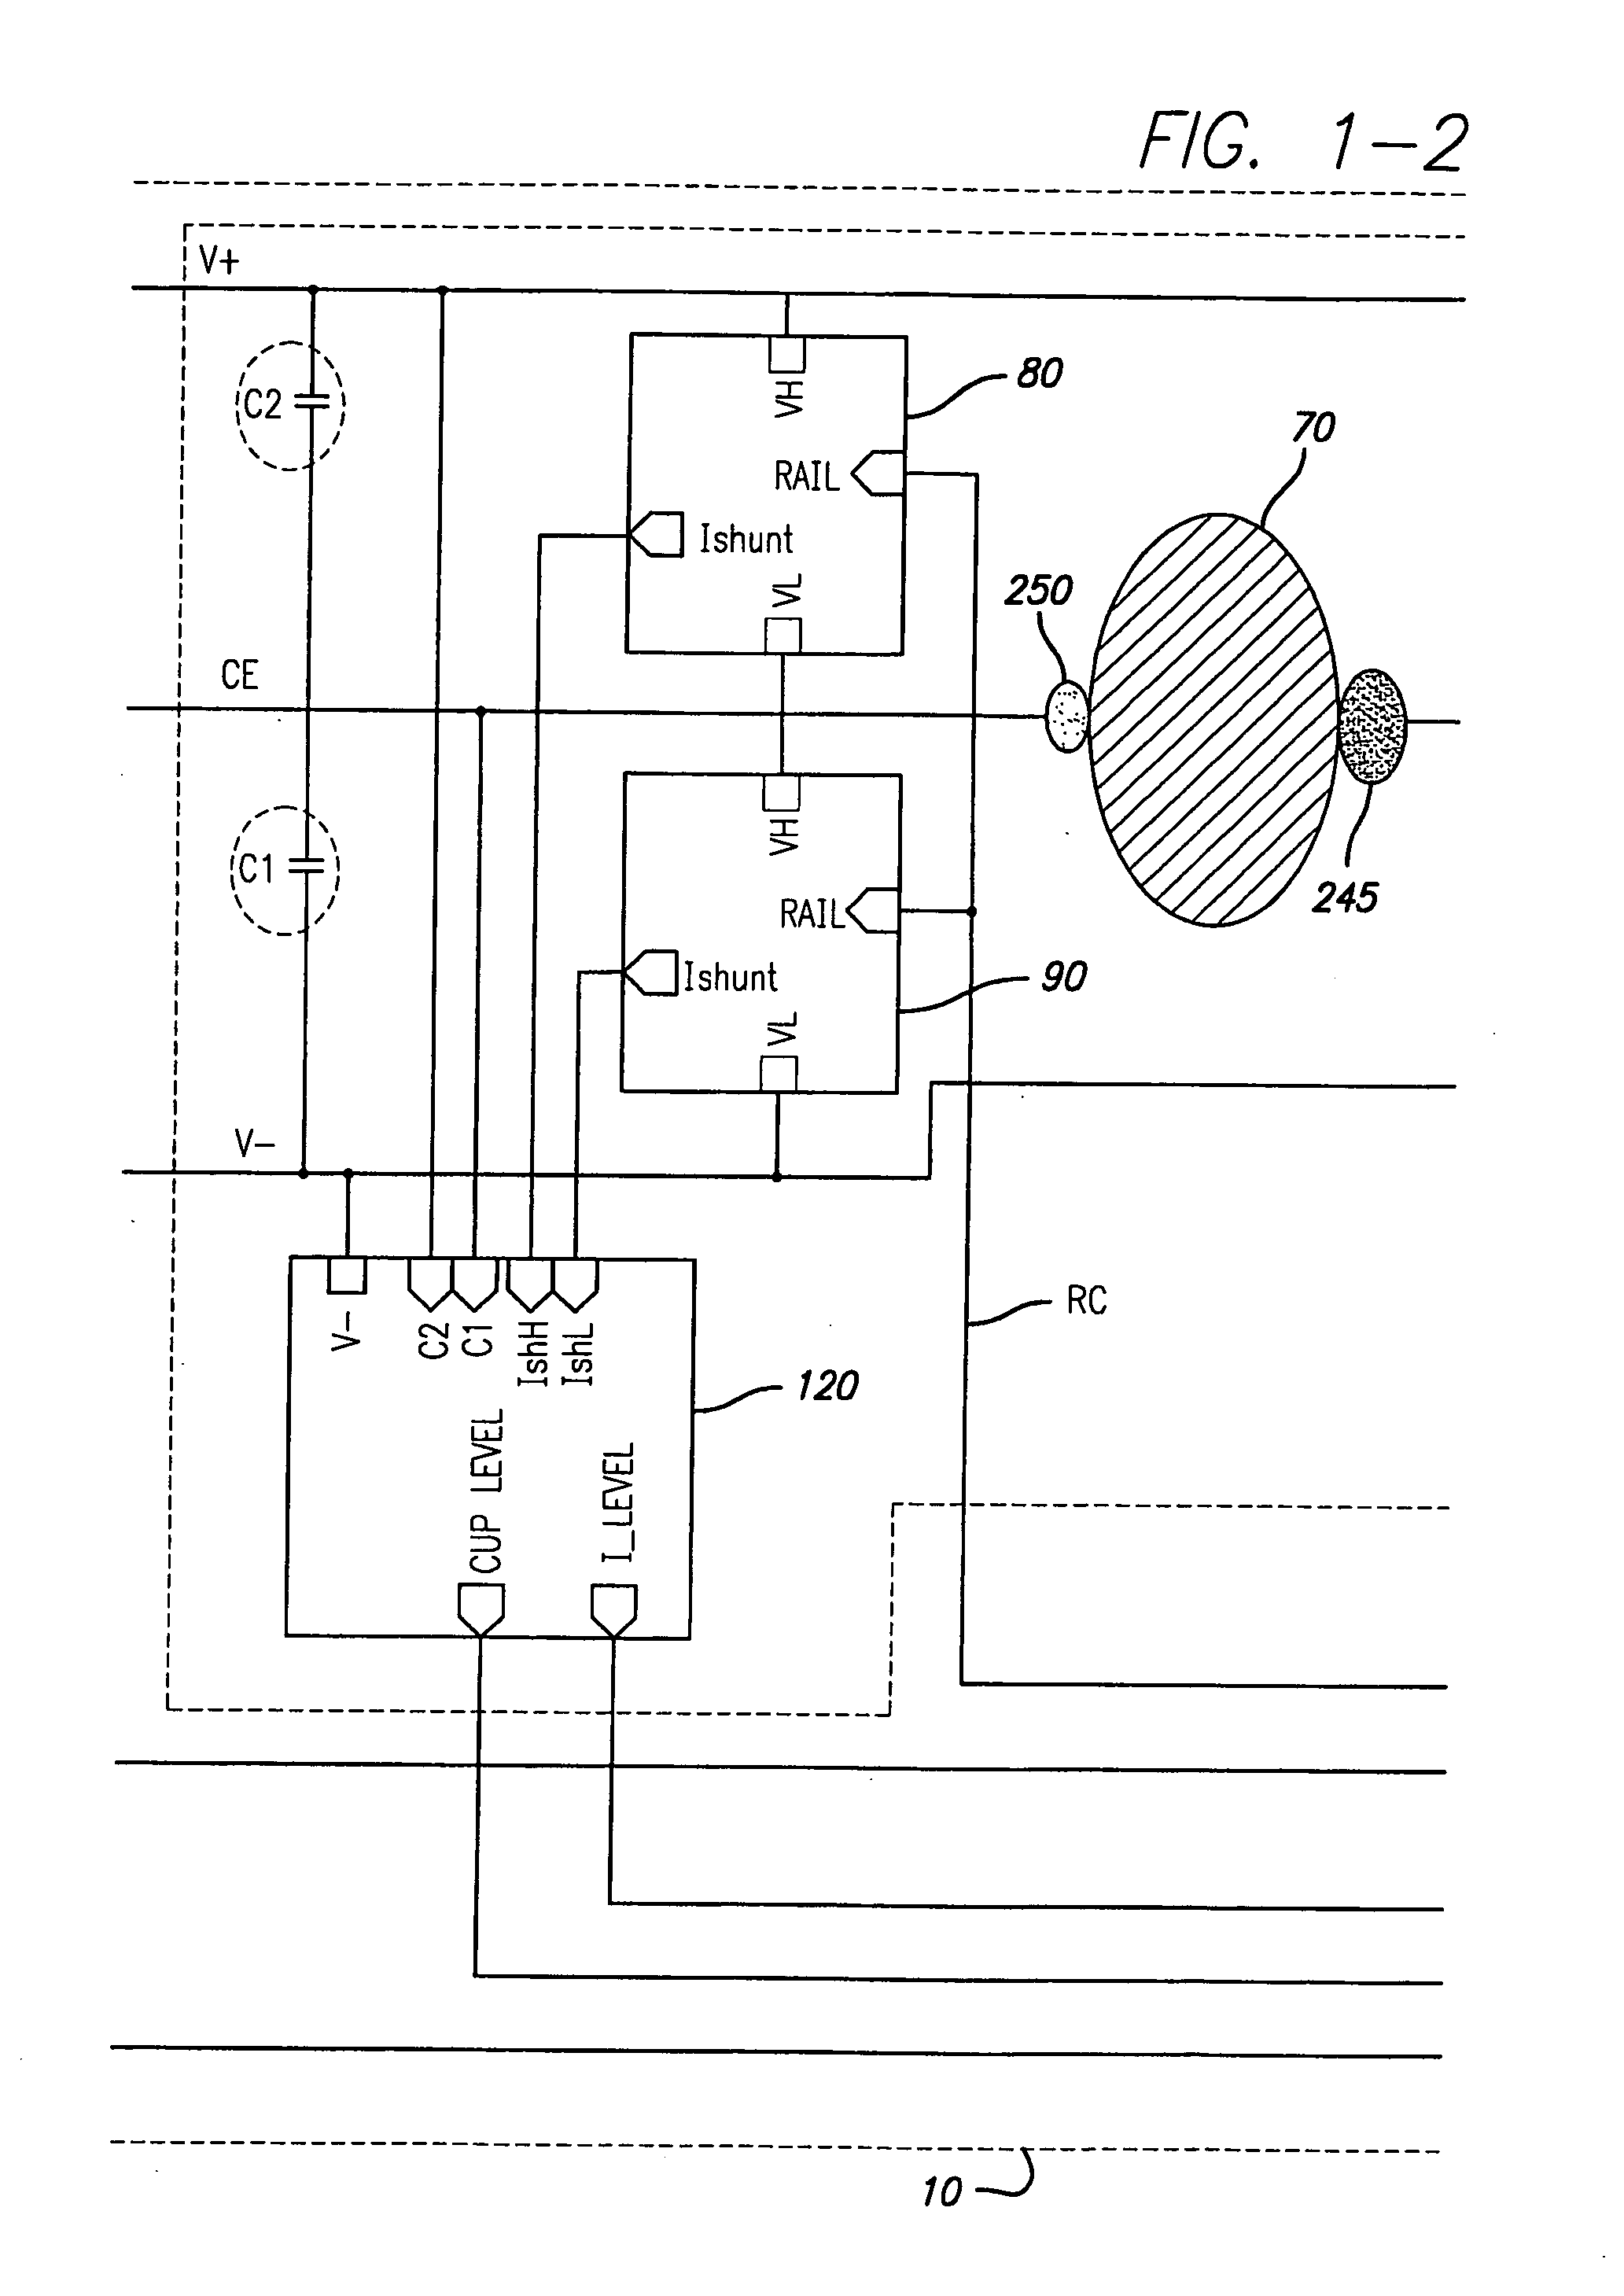 Power Scheme for Implant Stimulators on the Human or Animal Body